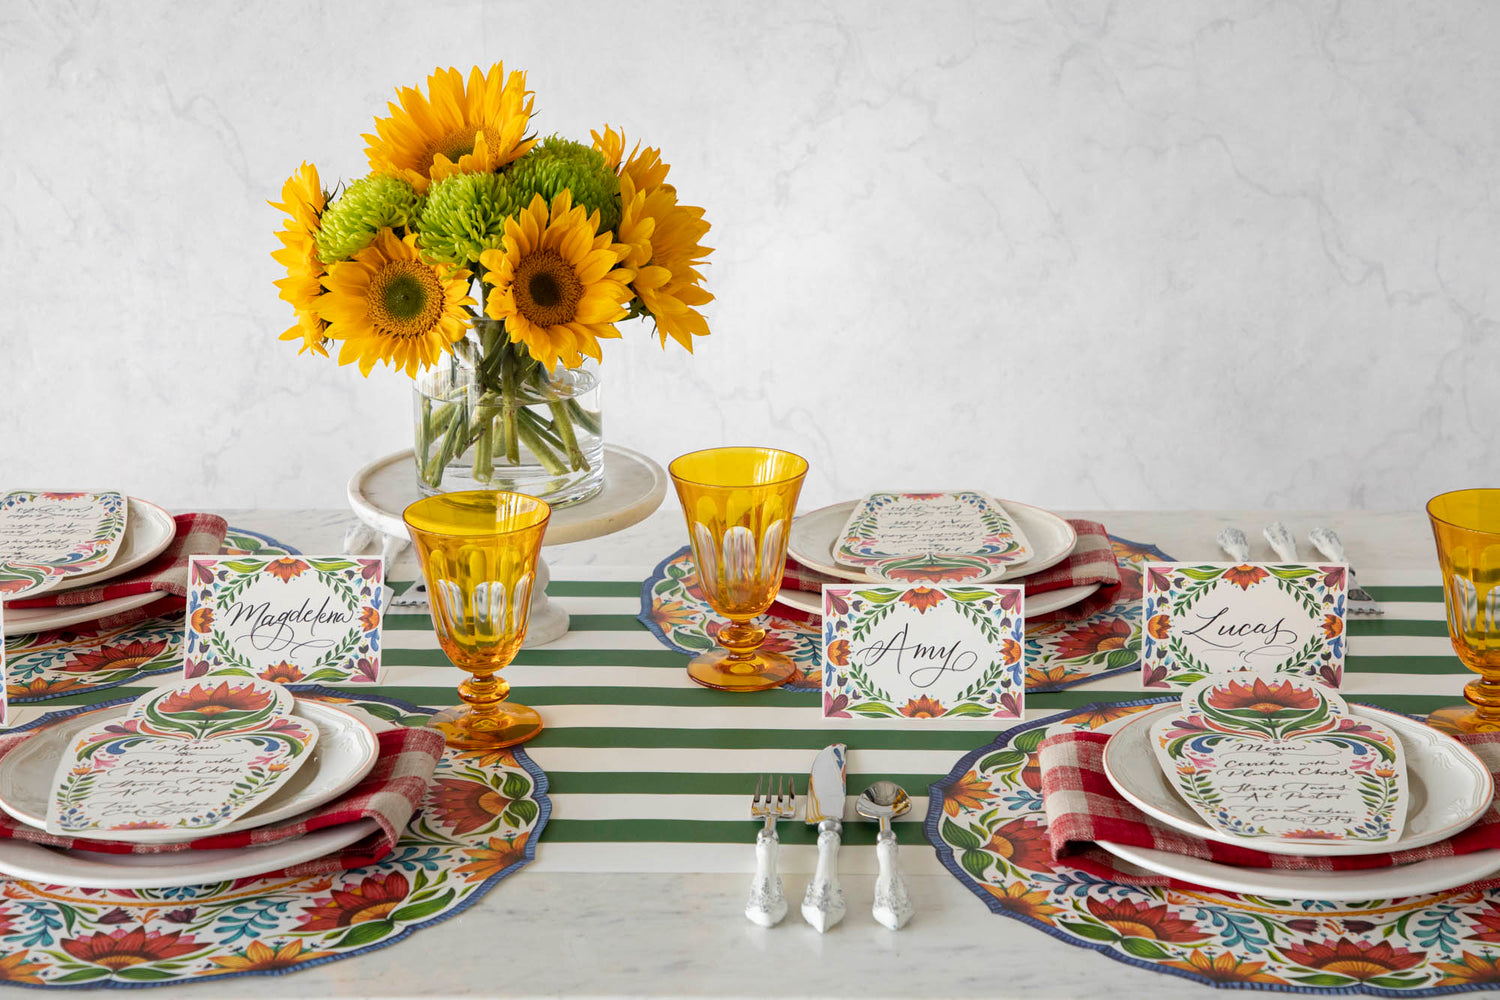 A vibrant tablescape featuring a Fiesta Floral Place Card at each place setting.